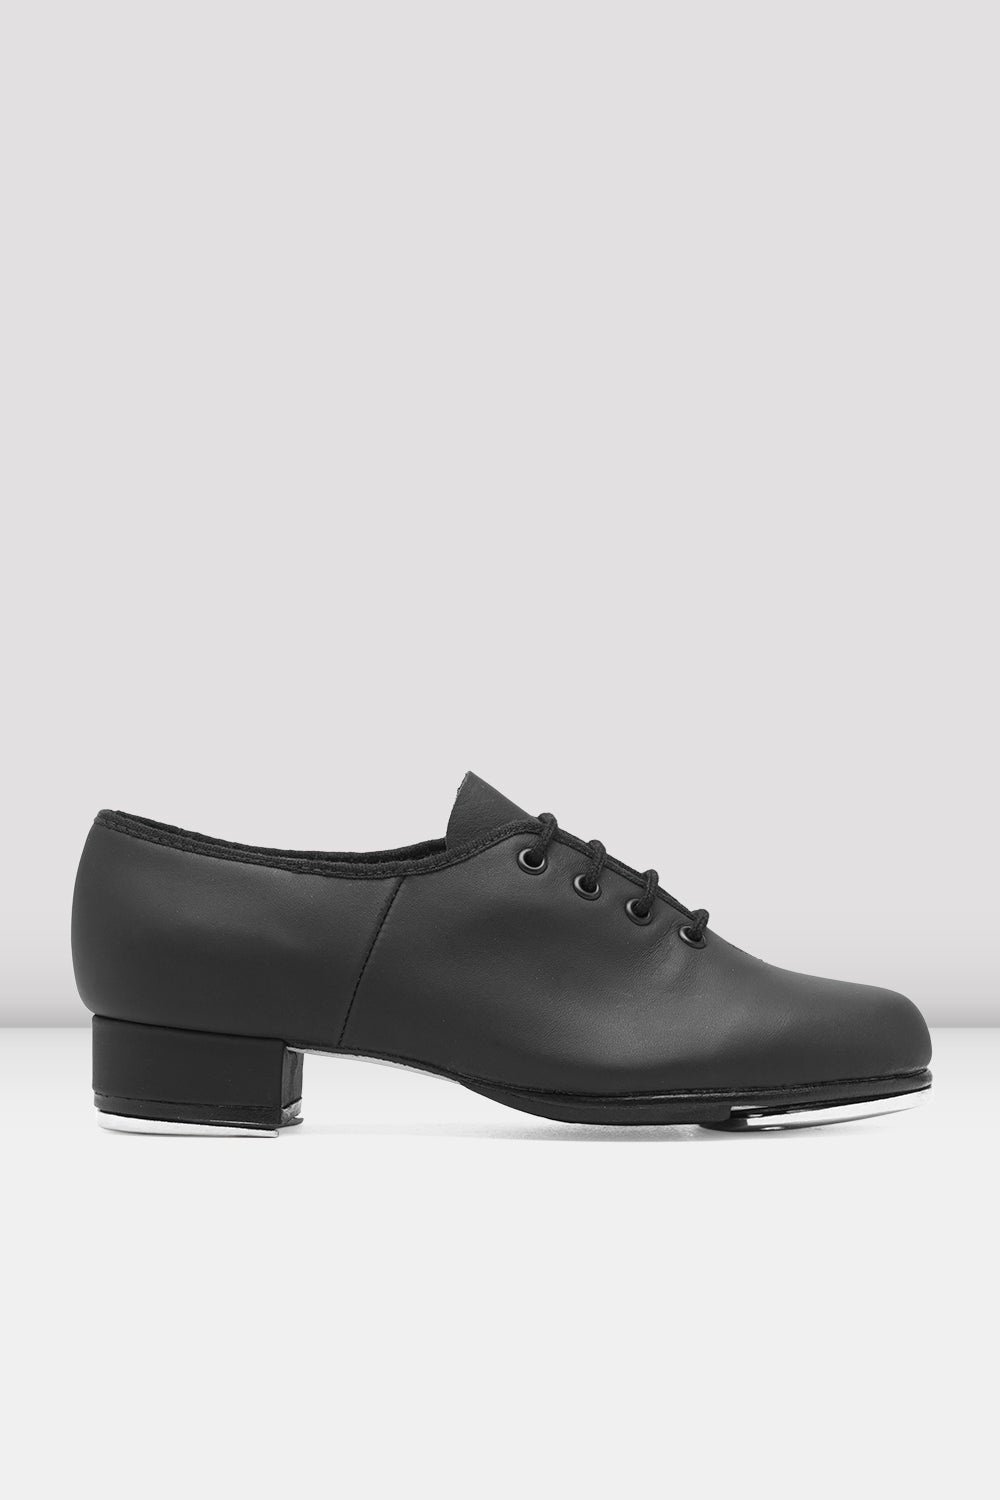 BLOCH Mens Jazz Tap Leather Tap Shoes, Black Leather